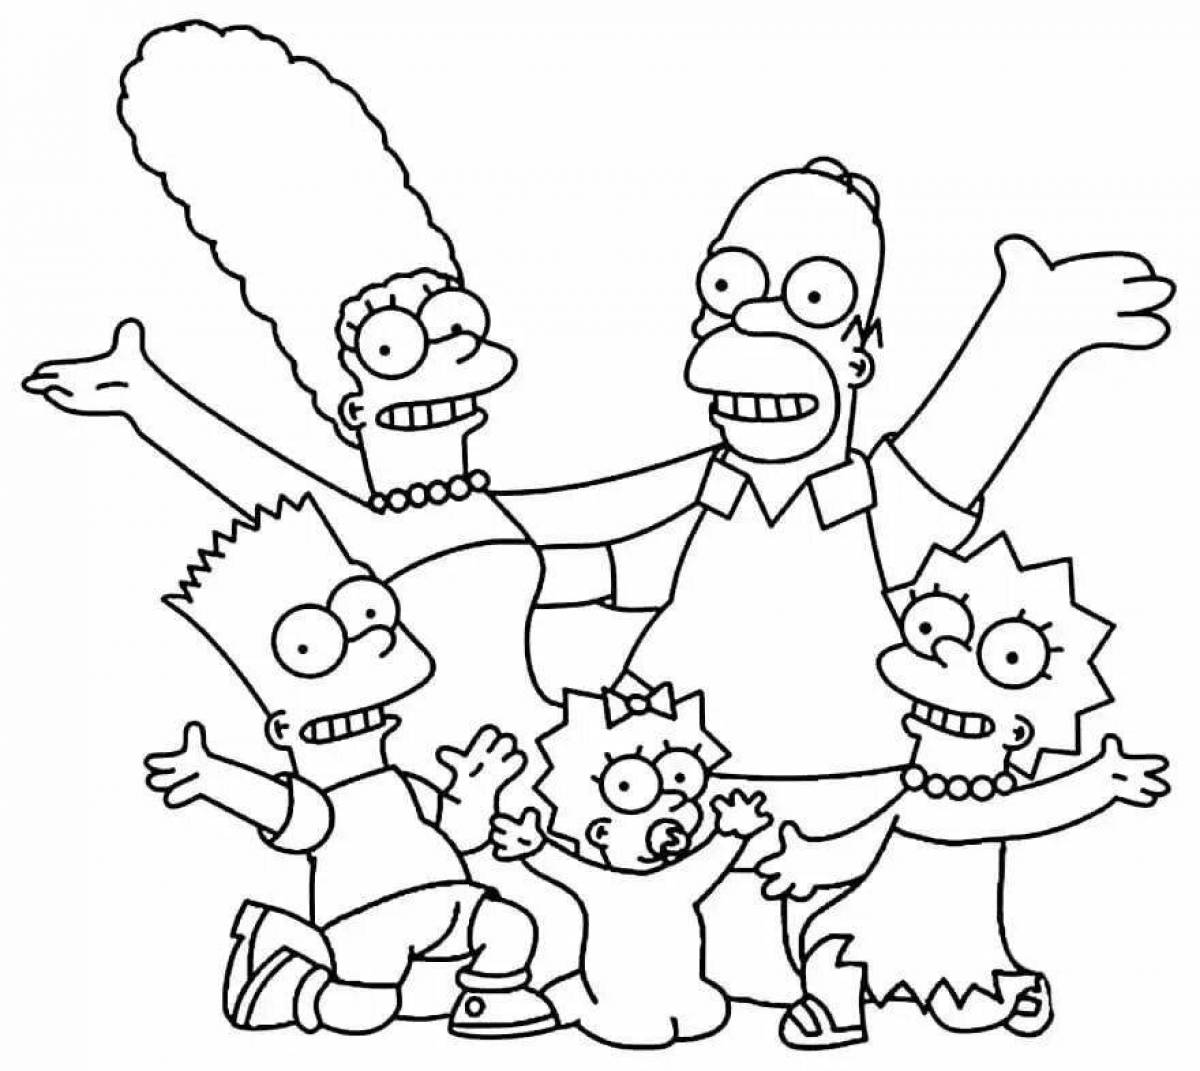 The simpsons extraordinary coloring by numbers